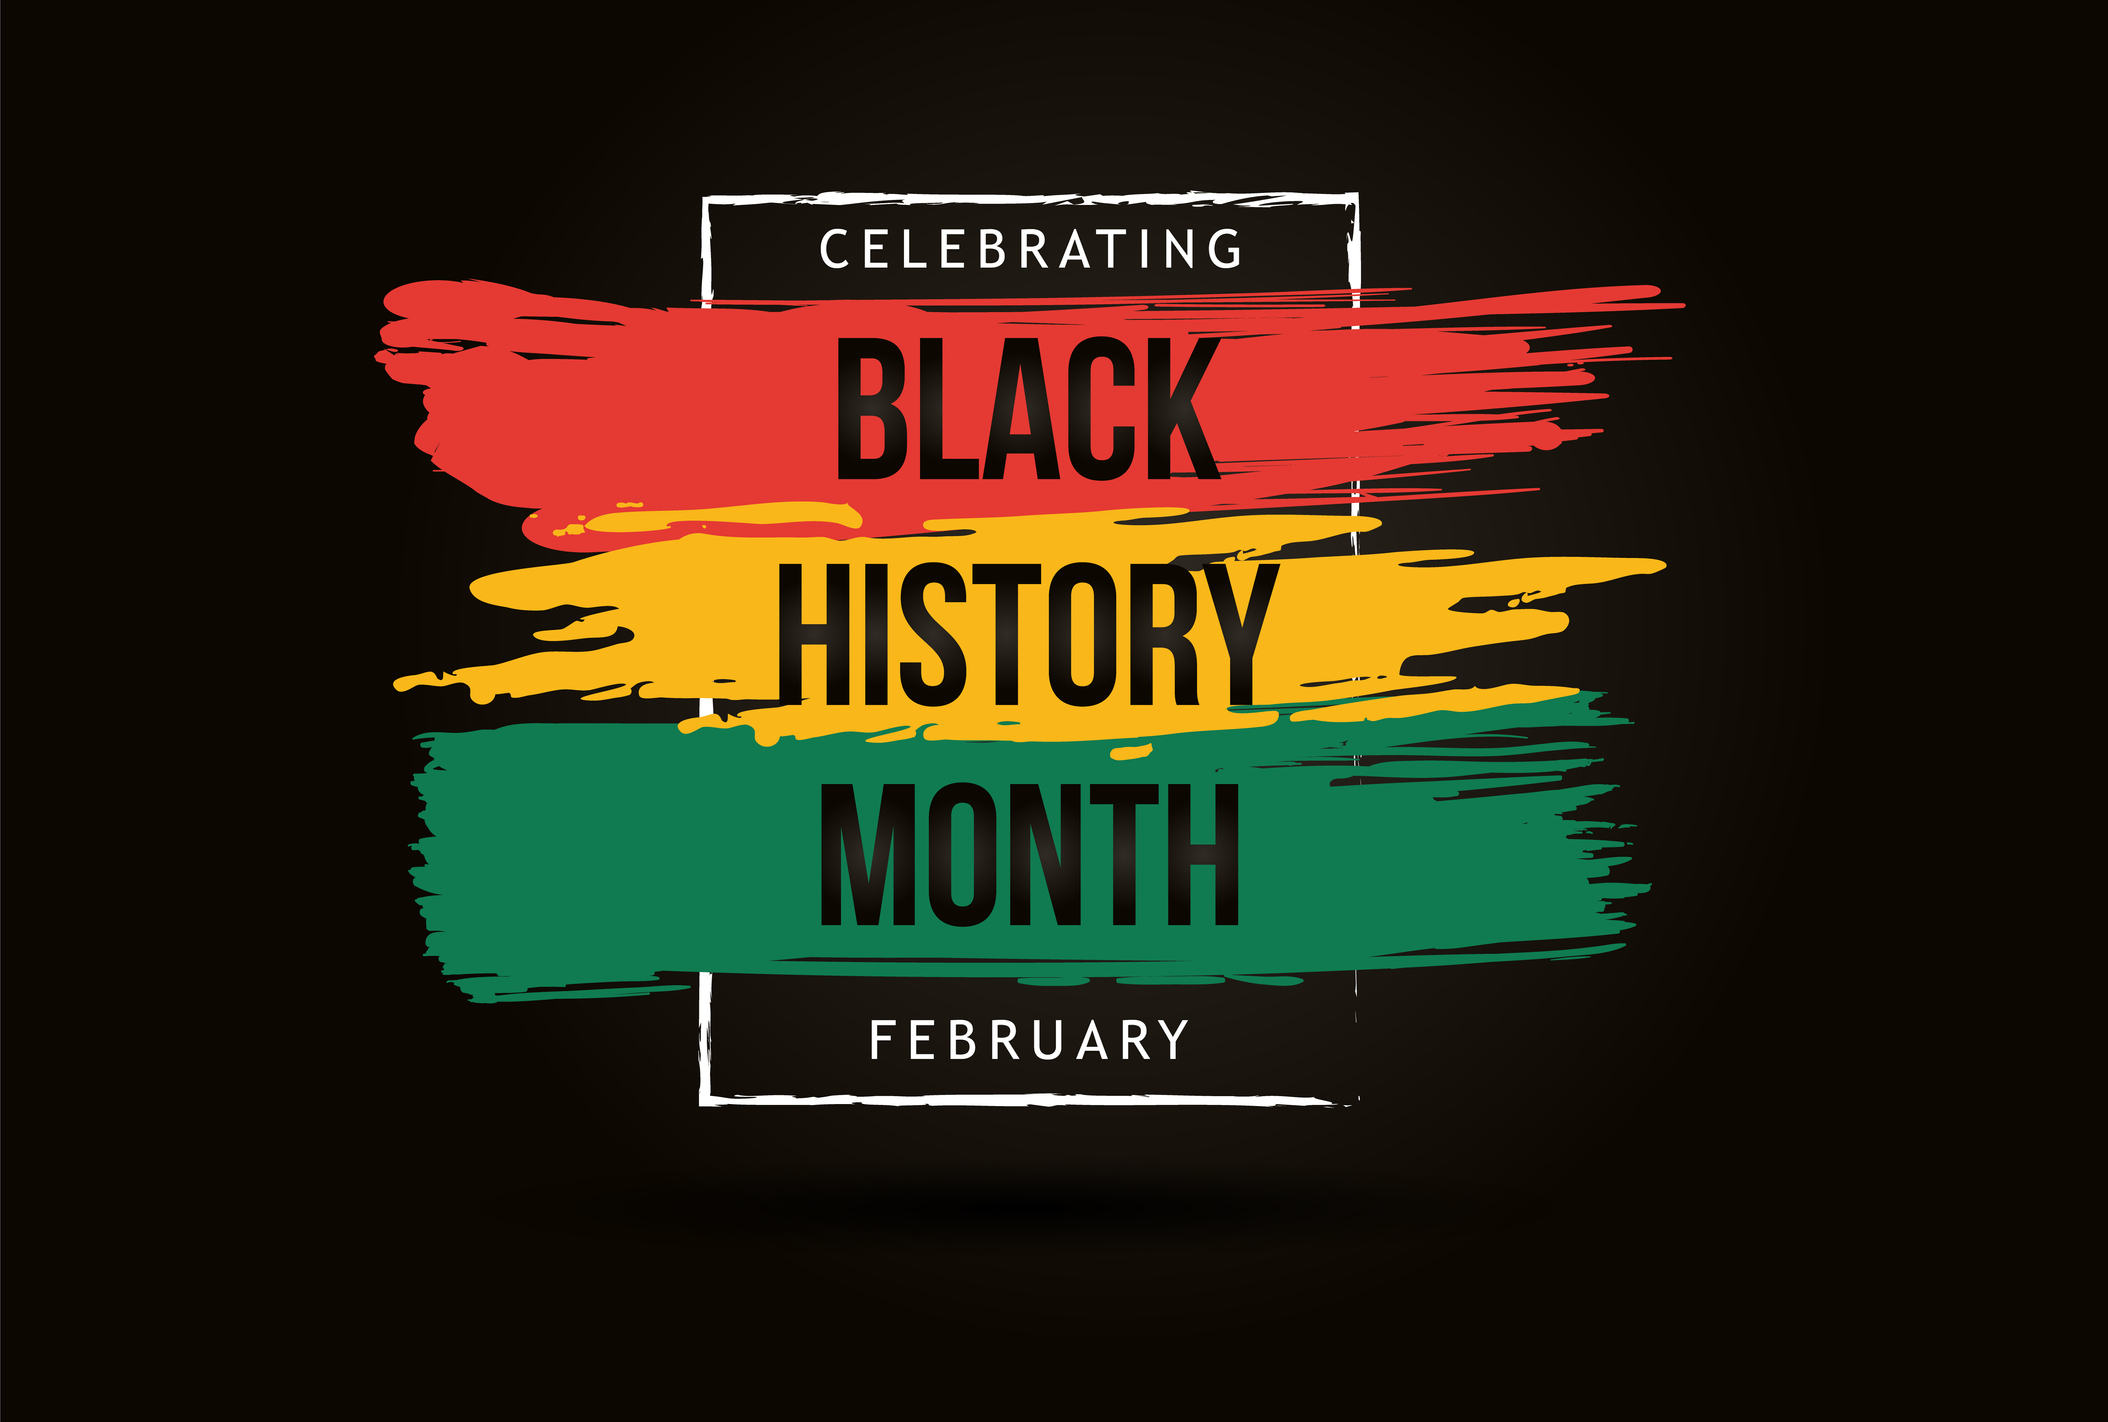 World Learning staff tap into a range of resources to celebrate Black History Month